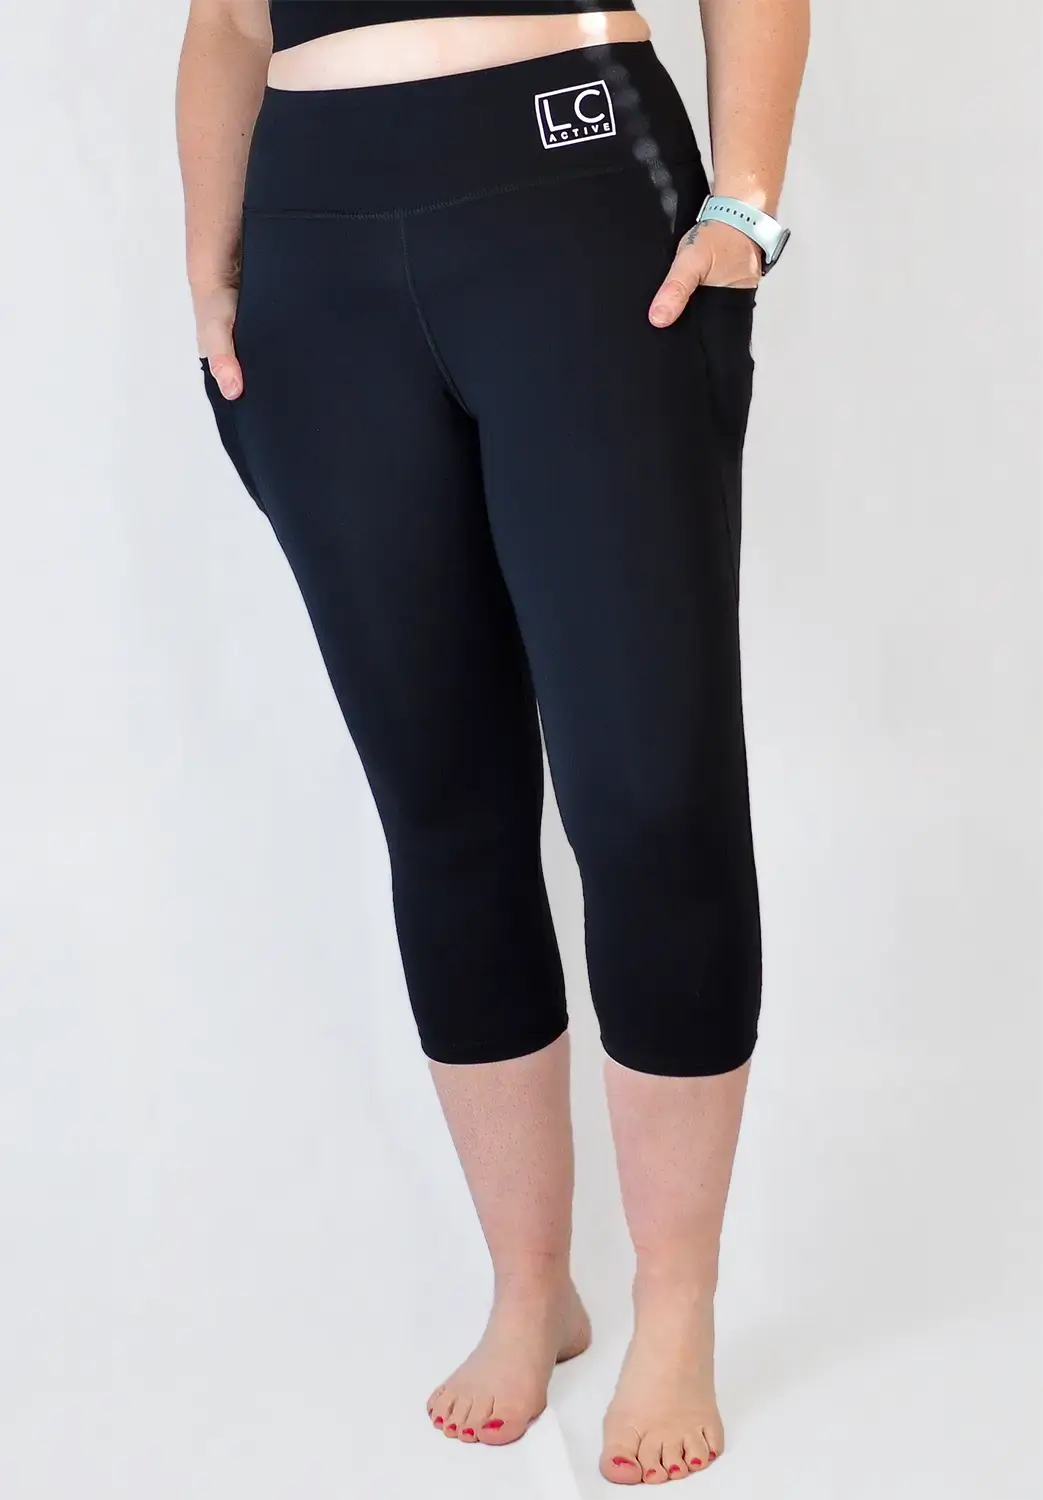 Cropped High Waisted Gym Leggings With Pockets For Women - LC Active Black